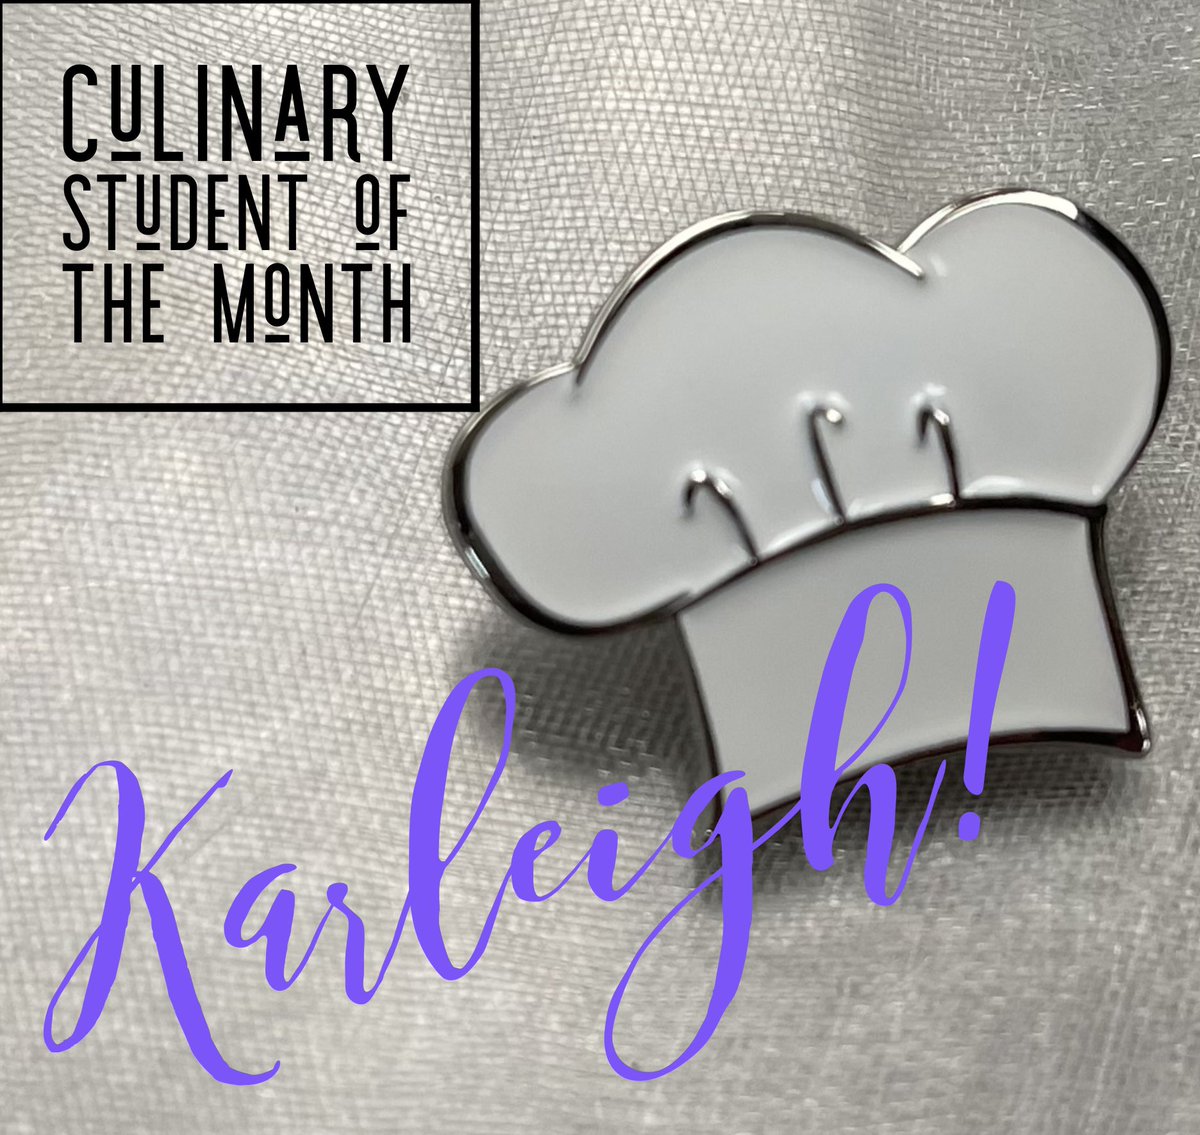 Our very first Culinary Arts Student of the Month impressed us so much with her drive, focus, follow-through, leadership, and consistently positive attitude that she inspired this very award! Congratulations, Karleigh! #BeyondAllLimits #lisdcte